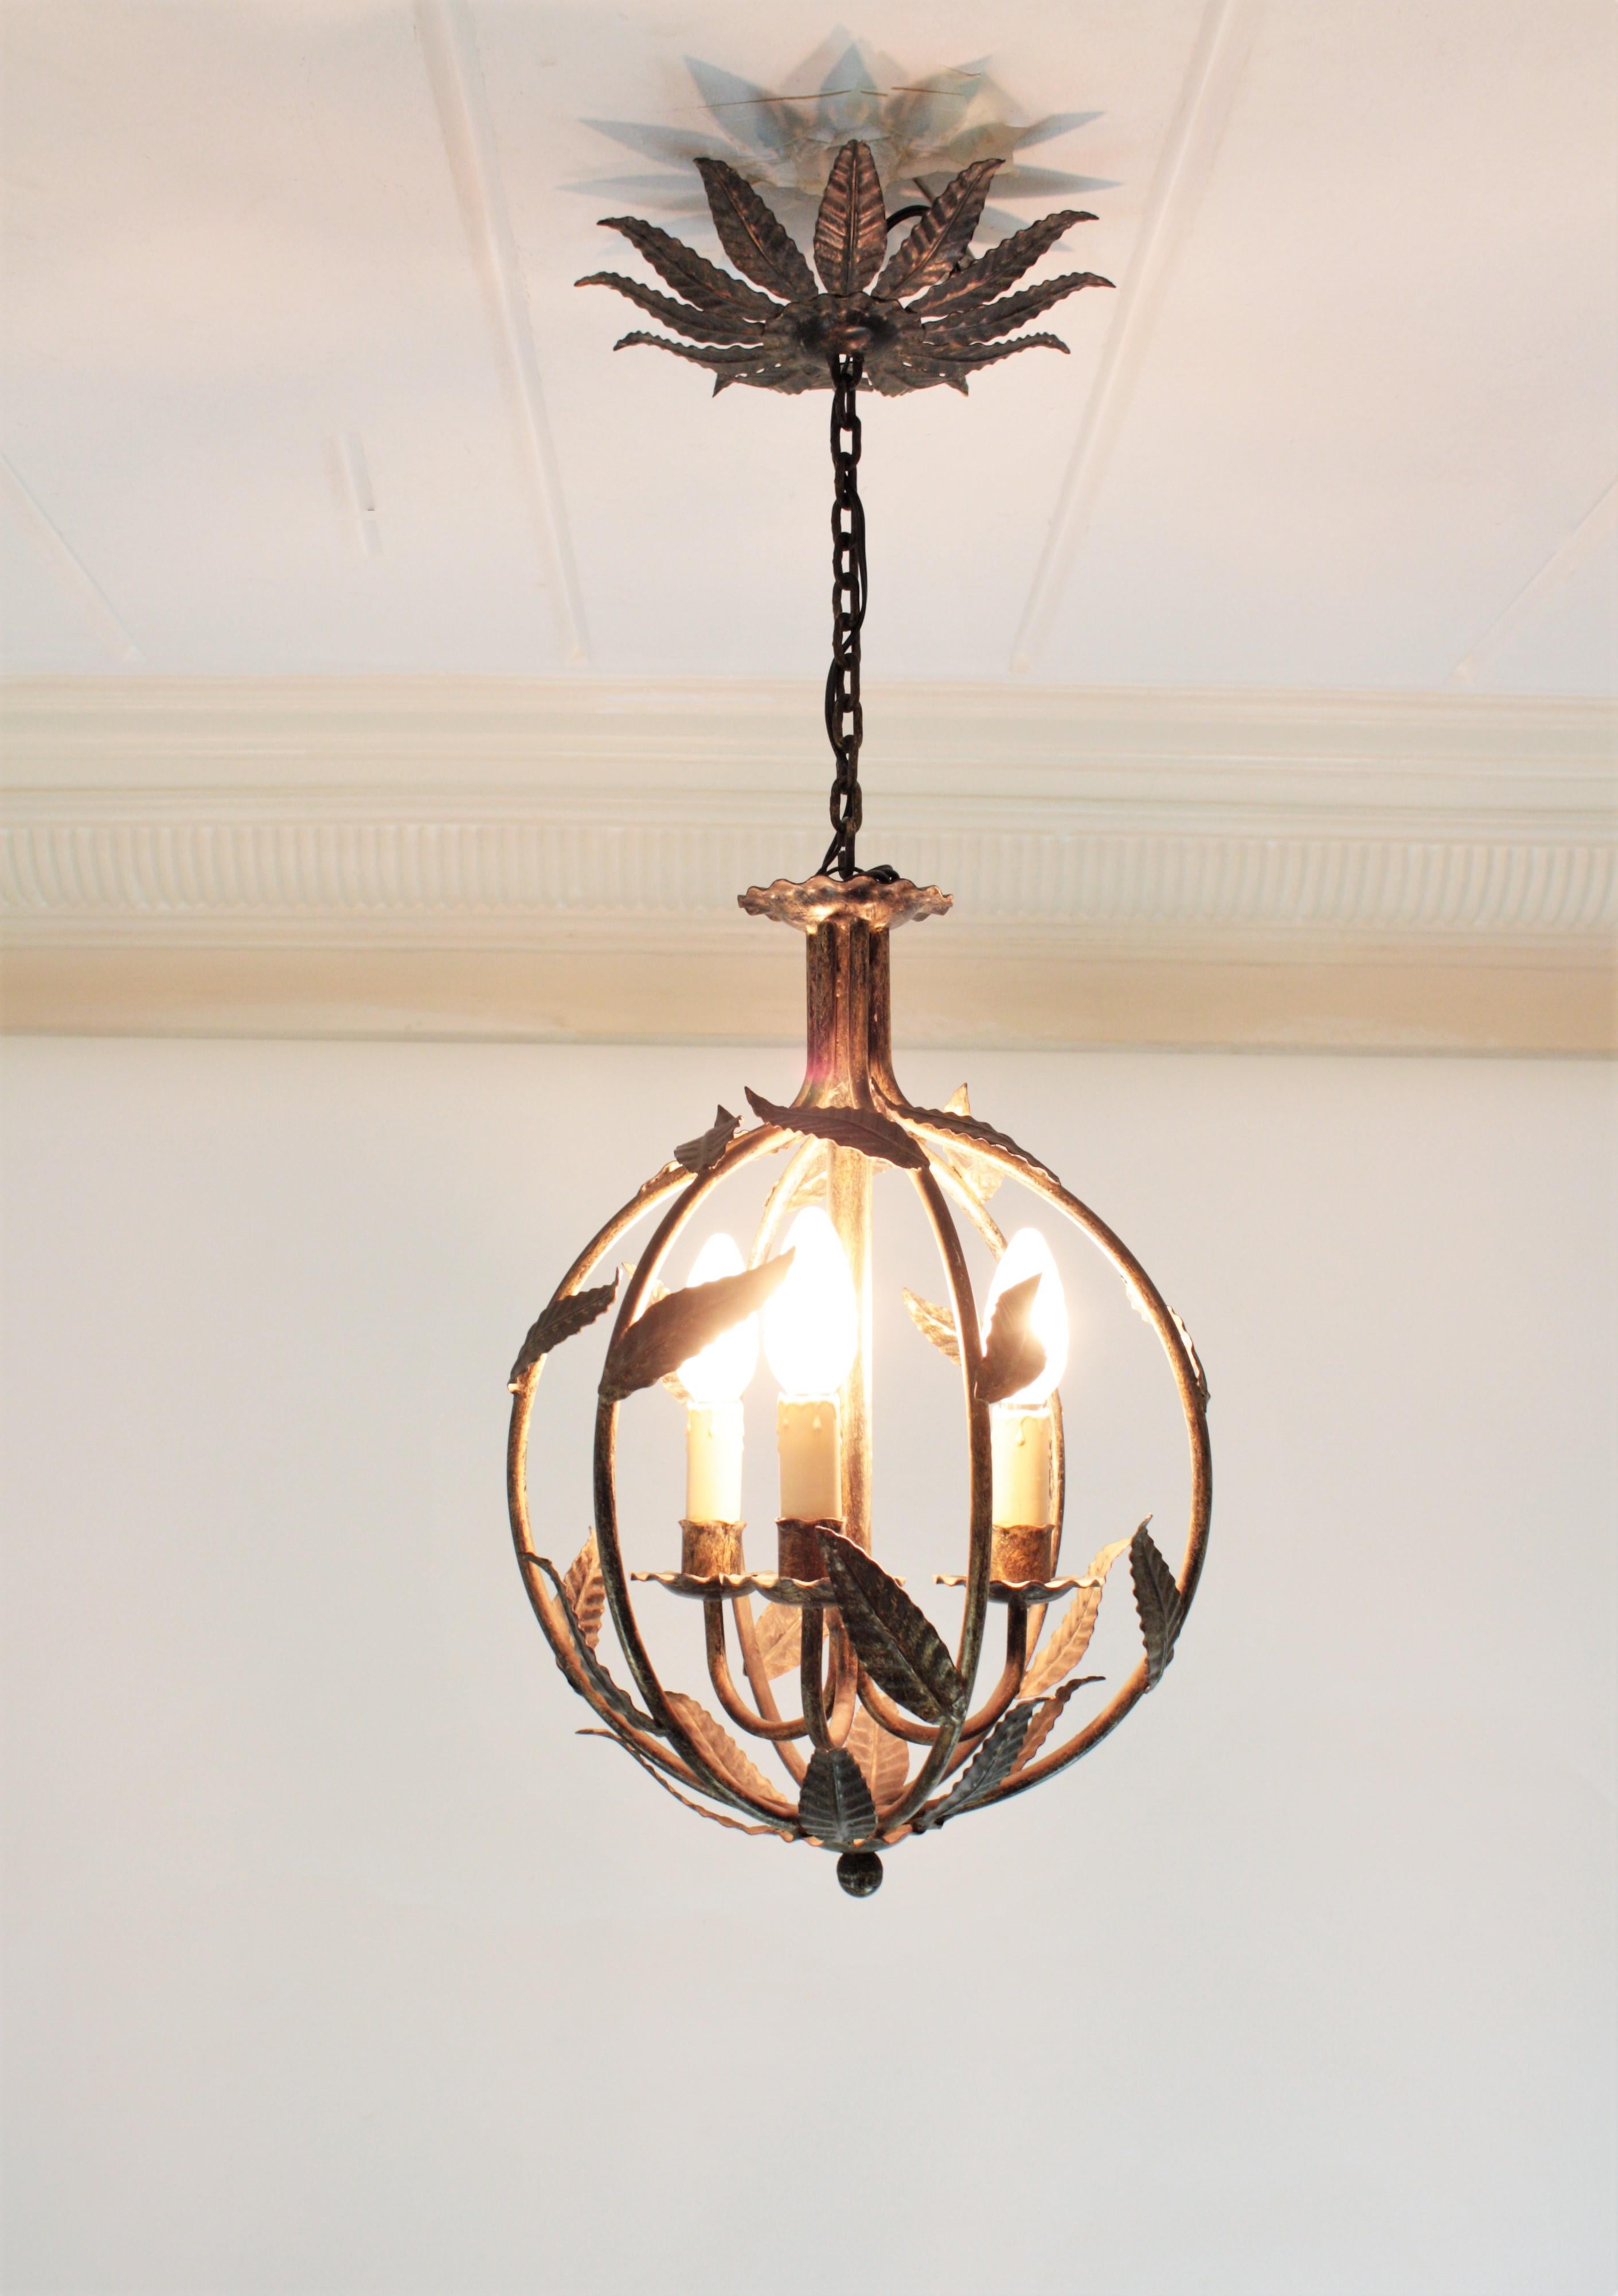 Neoclassical French Parcel-Gilt Wrought Iron Globe Pendant Light / Lantern with Leaves Design